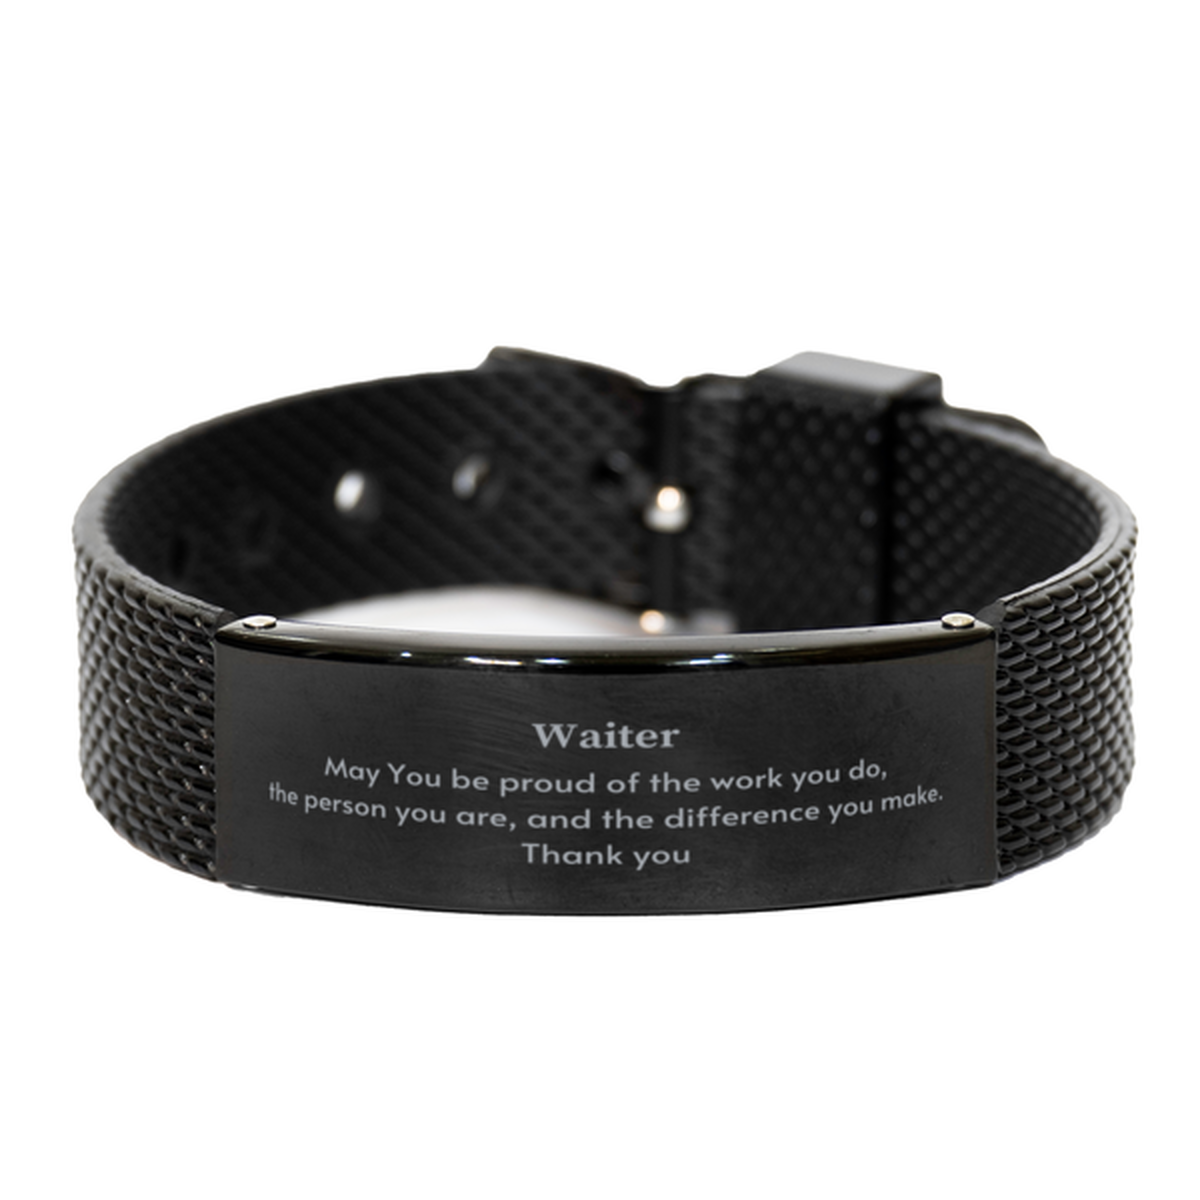 Heartwarming Black Shark Mesh Bracelet Retirement Coworkers Gifts for Waiter, Waiter May You be proud of the work you do, the person you are Gifts for Boss Men Women Friends